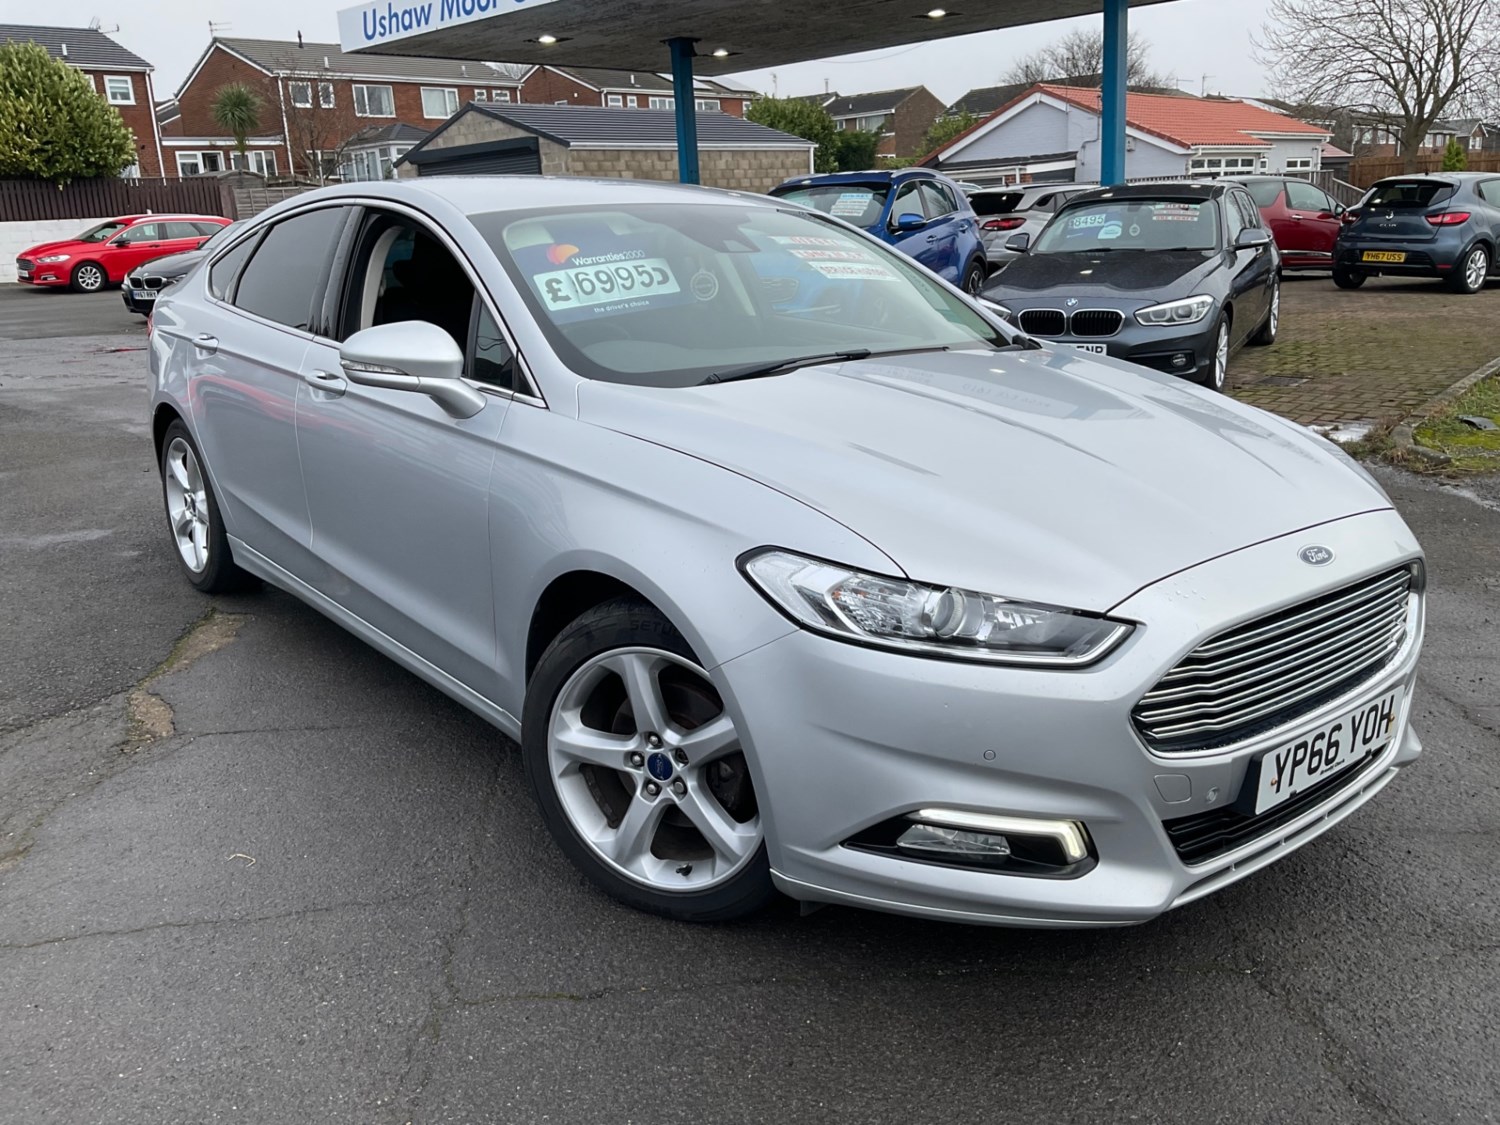 Ford Mondeo Listing Image